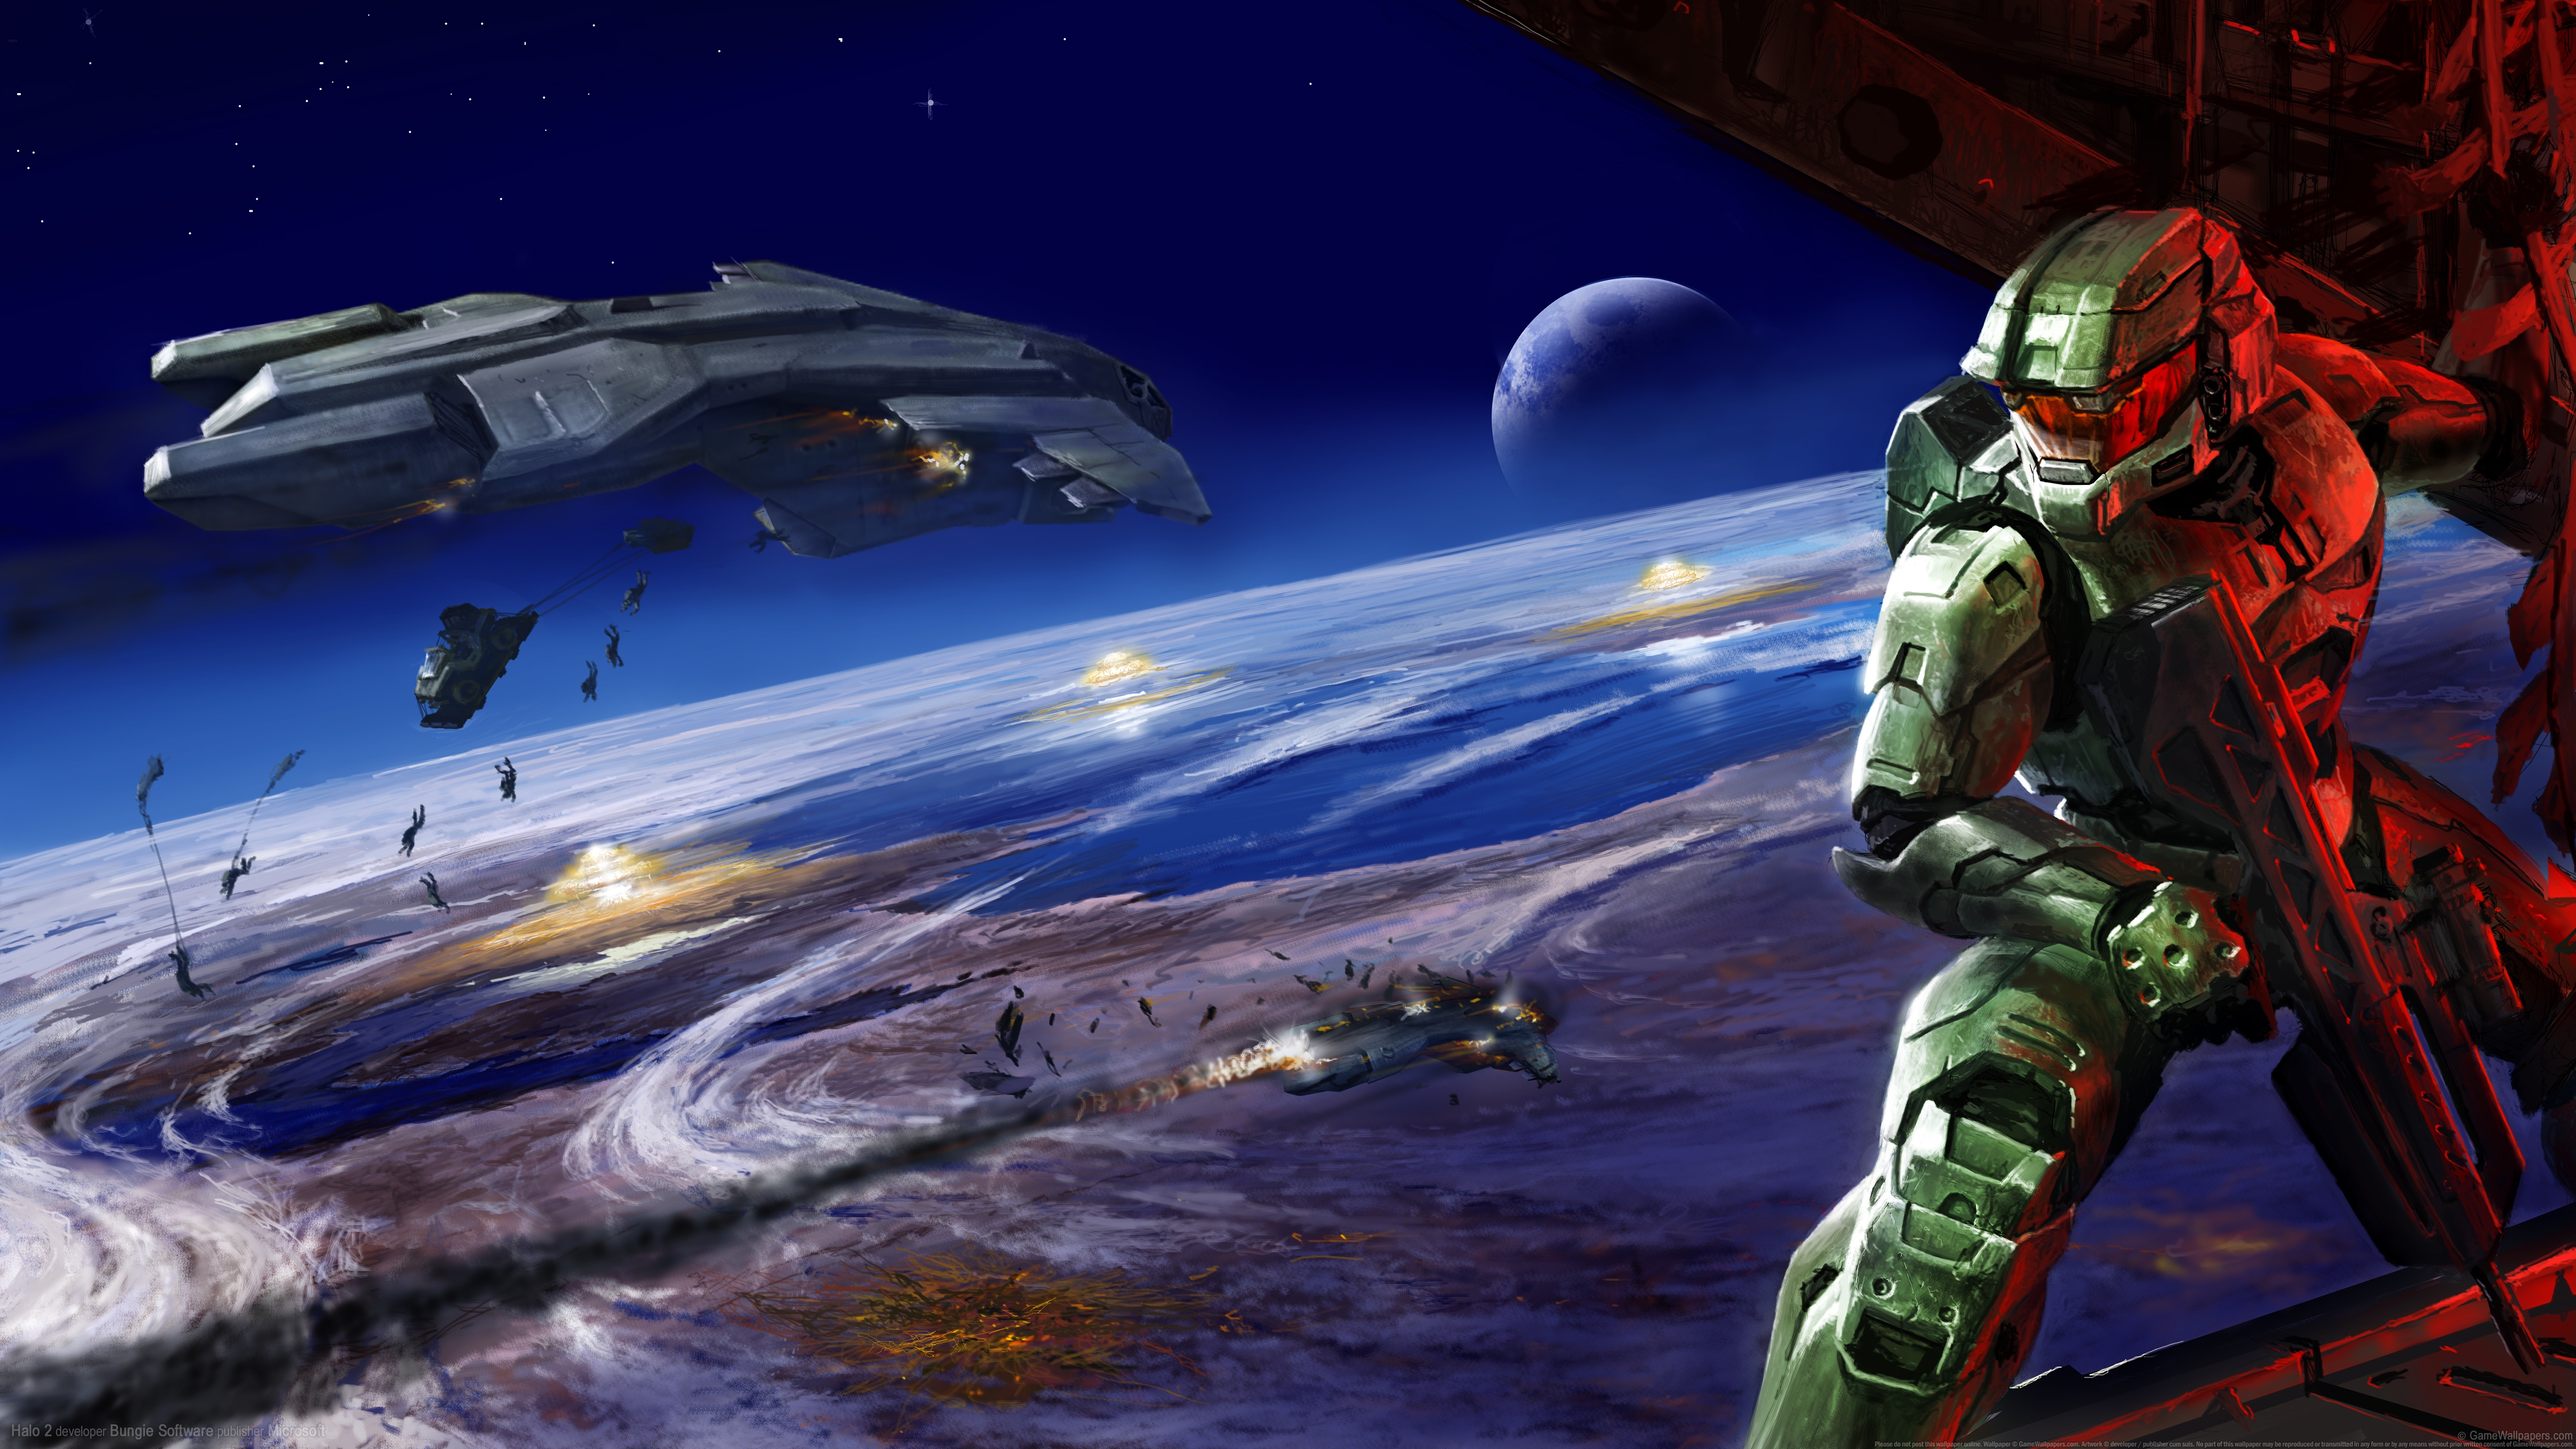 Halo 2 5120x2880 wallpaper or background 18